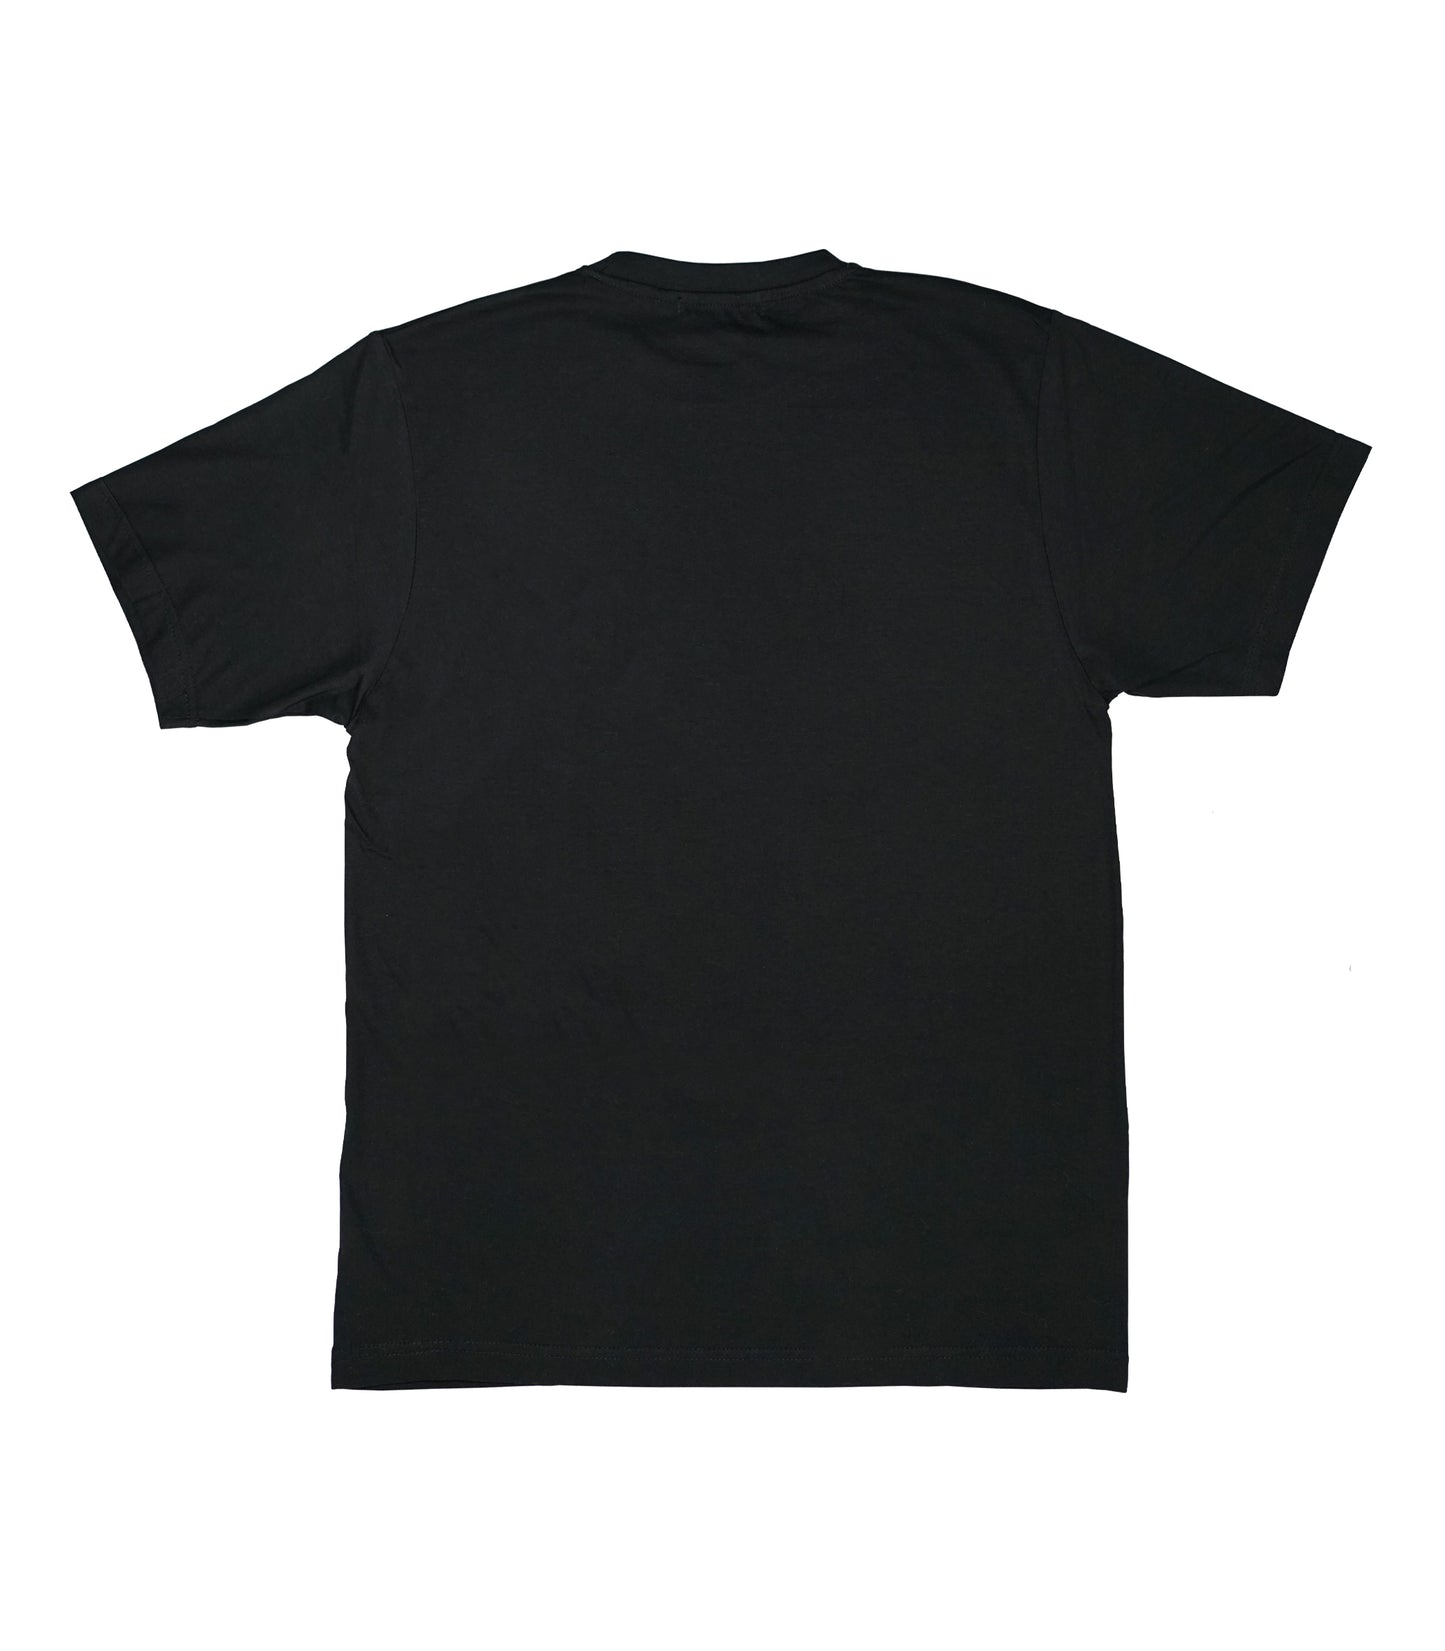 Clipped tee